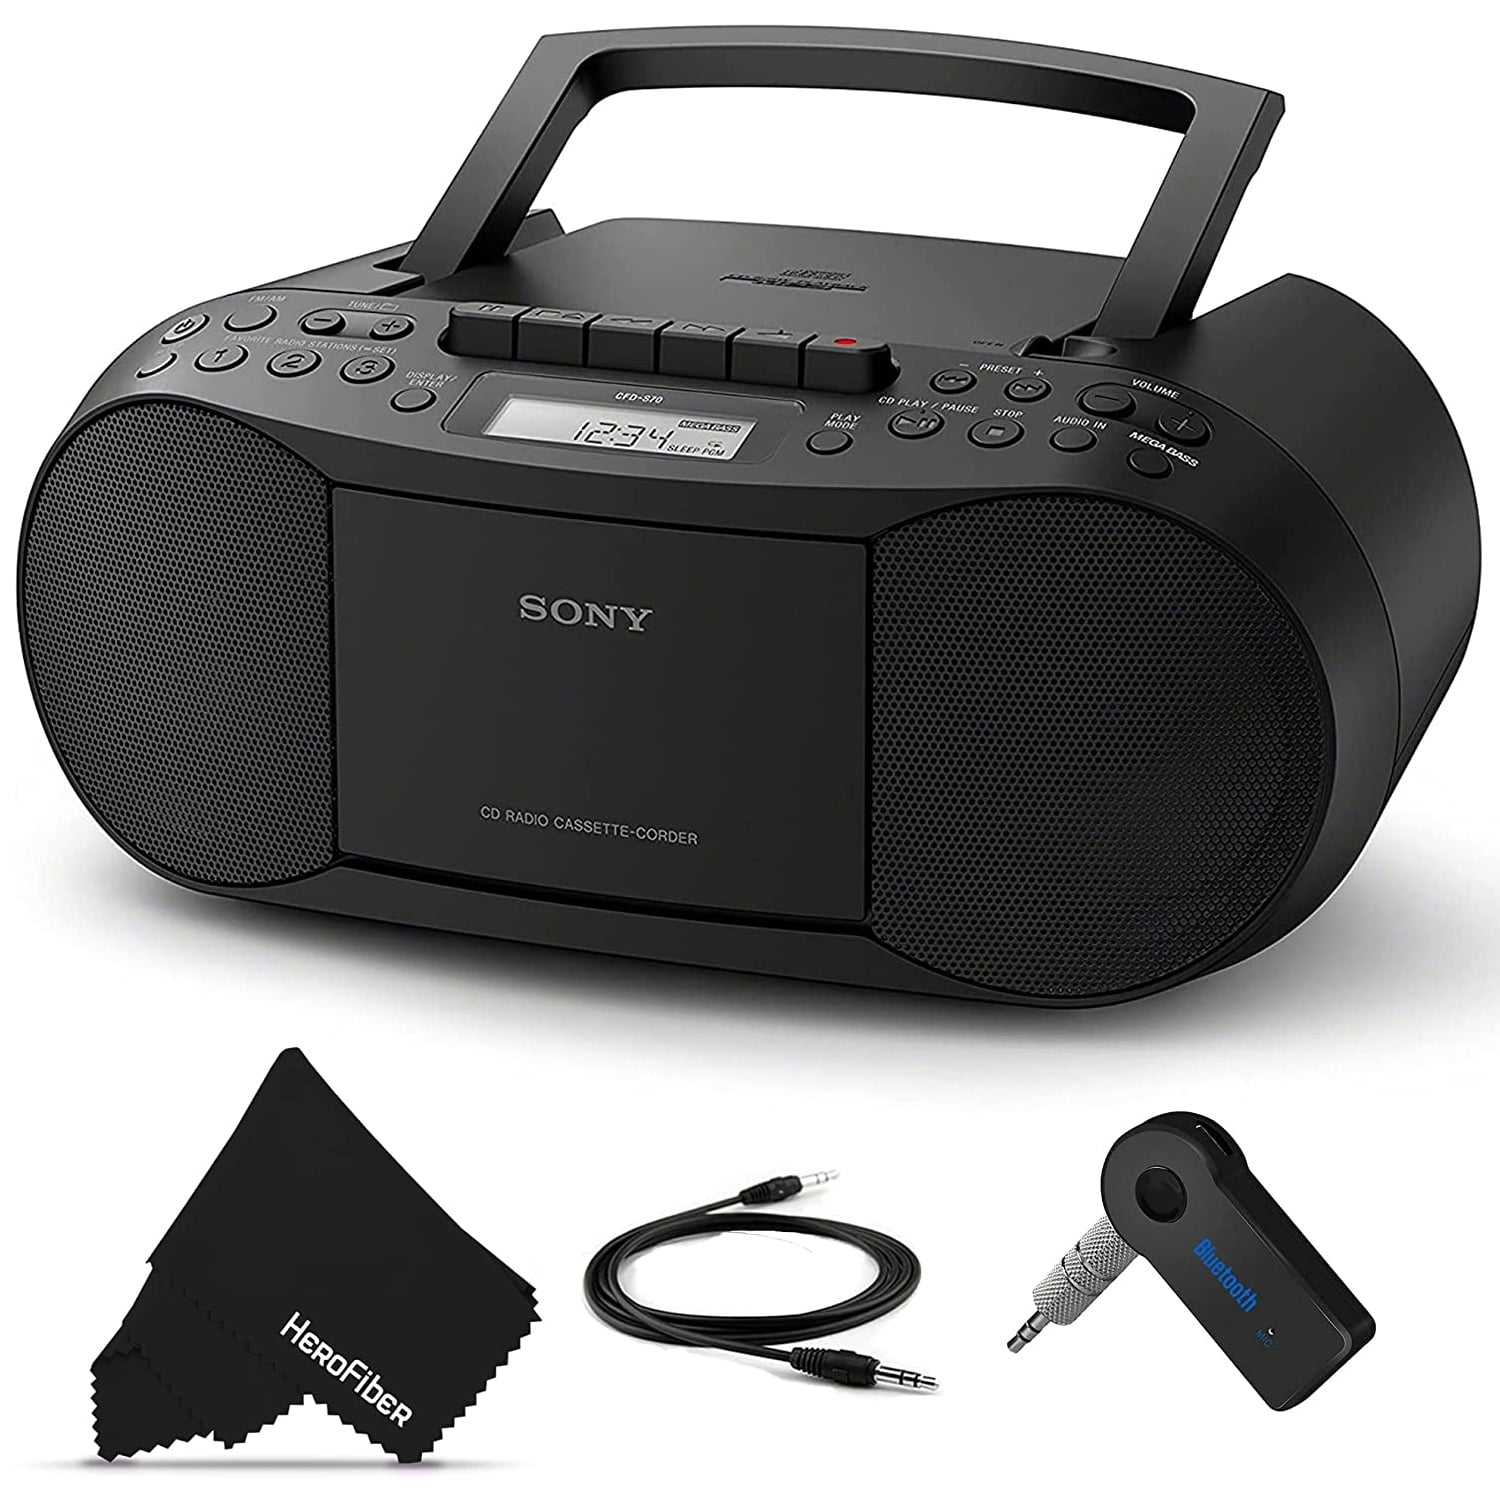 Radio with CD Player CD Players for Home Portable CD Player with AM/FM VENLOIC Bluetooth CD Player CD Player Boombox 